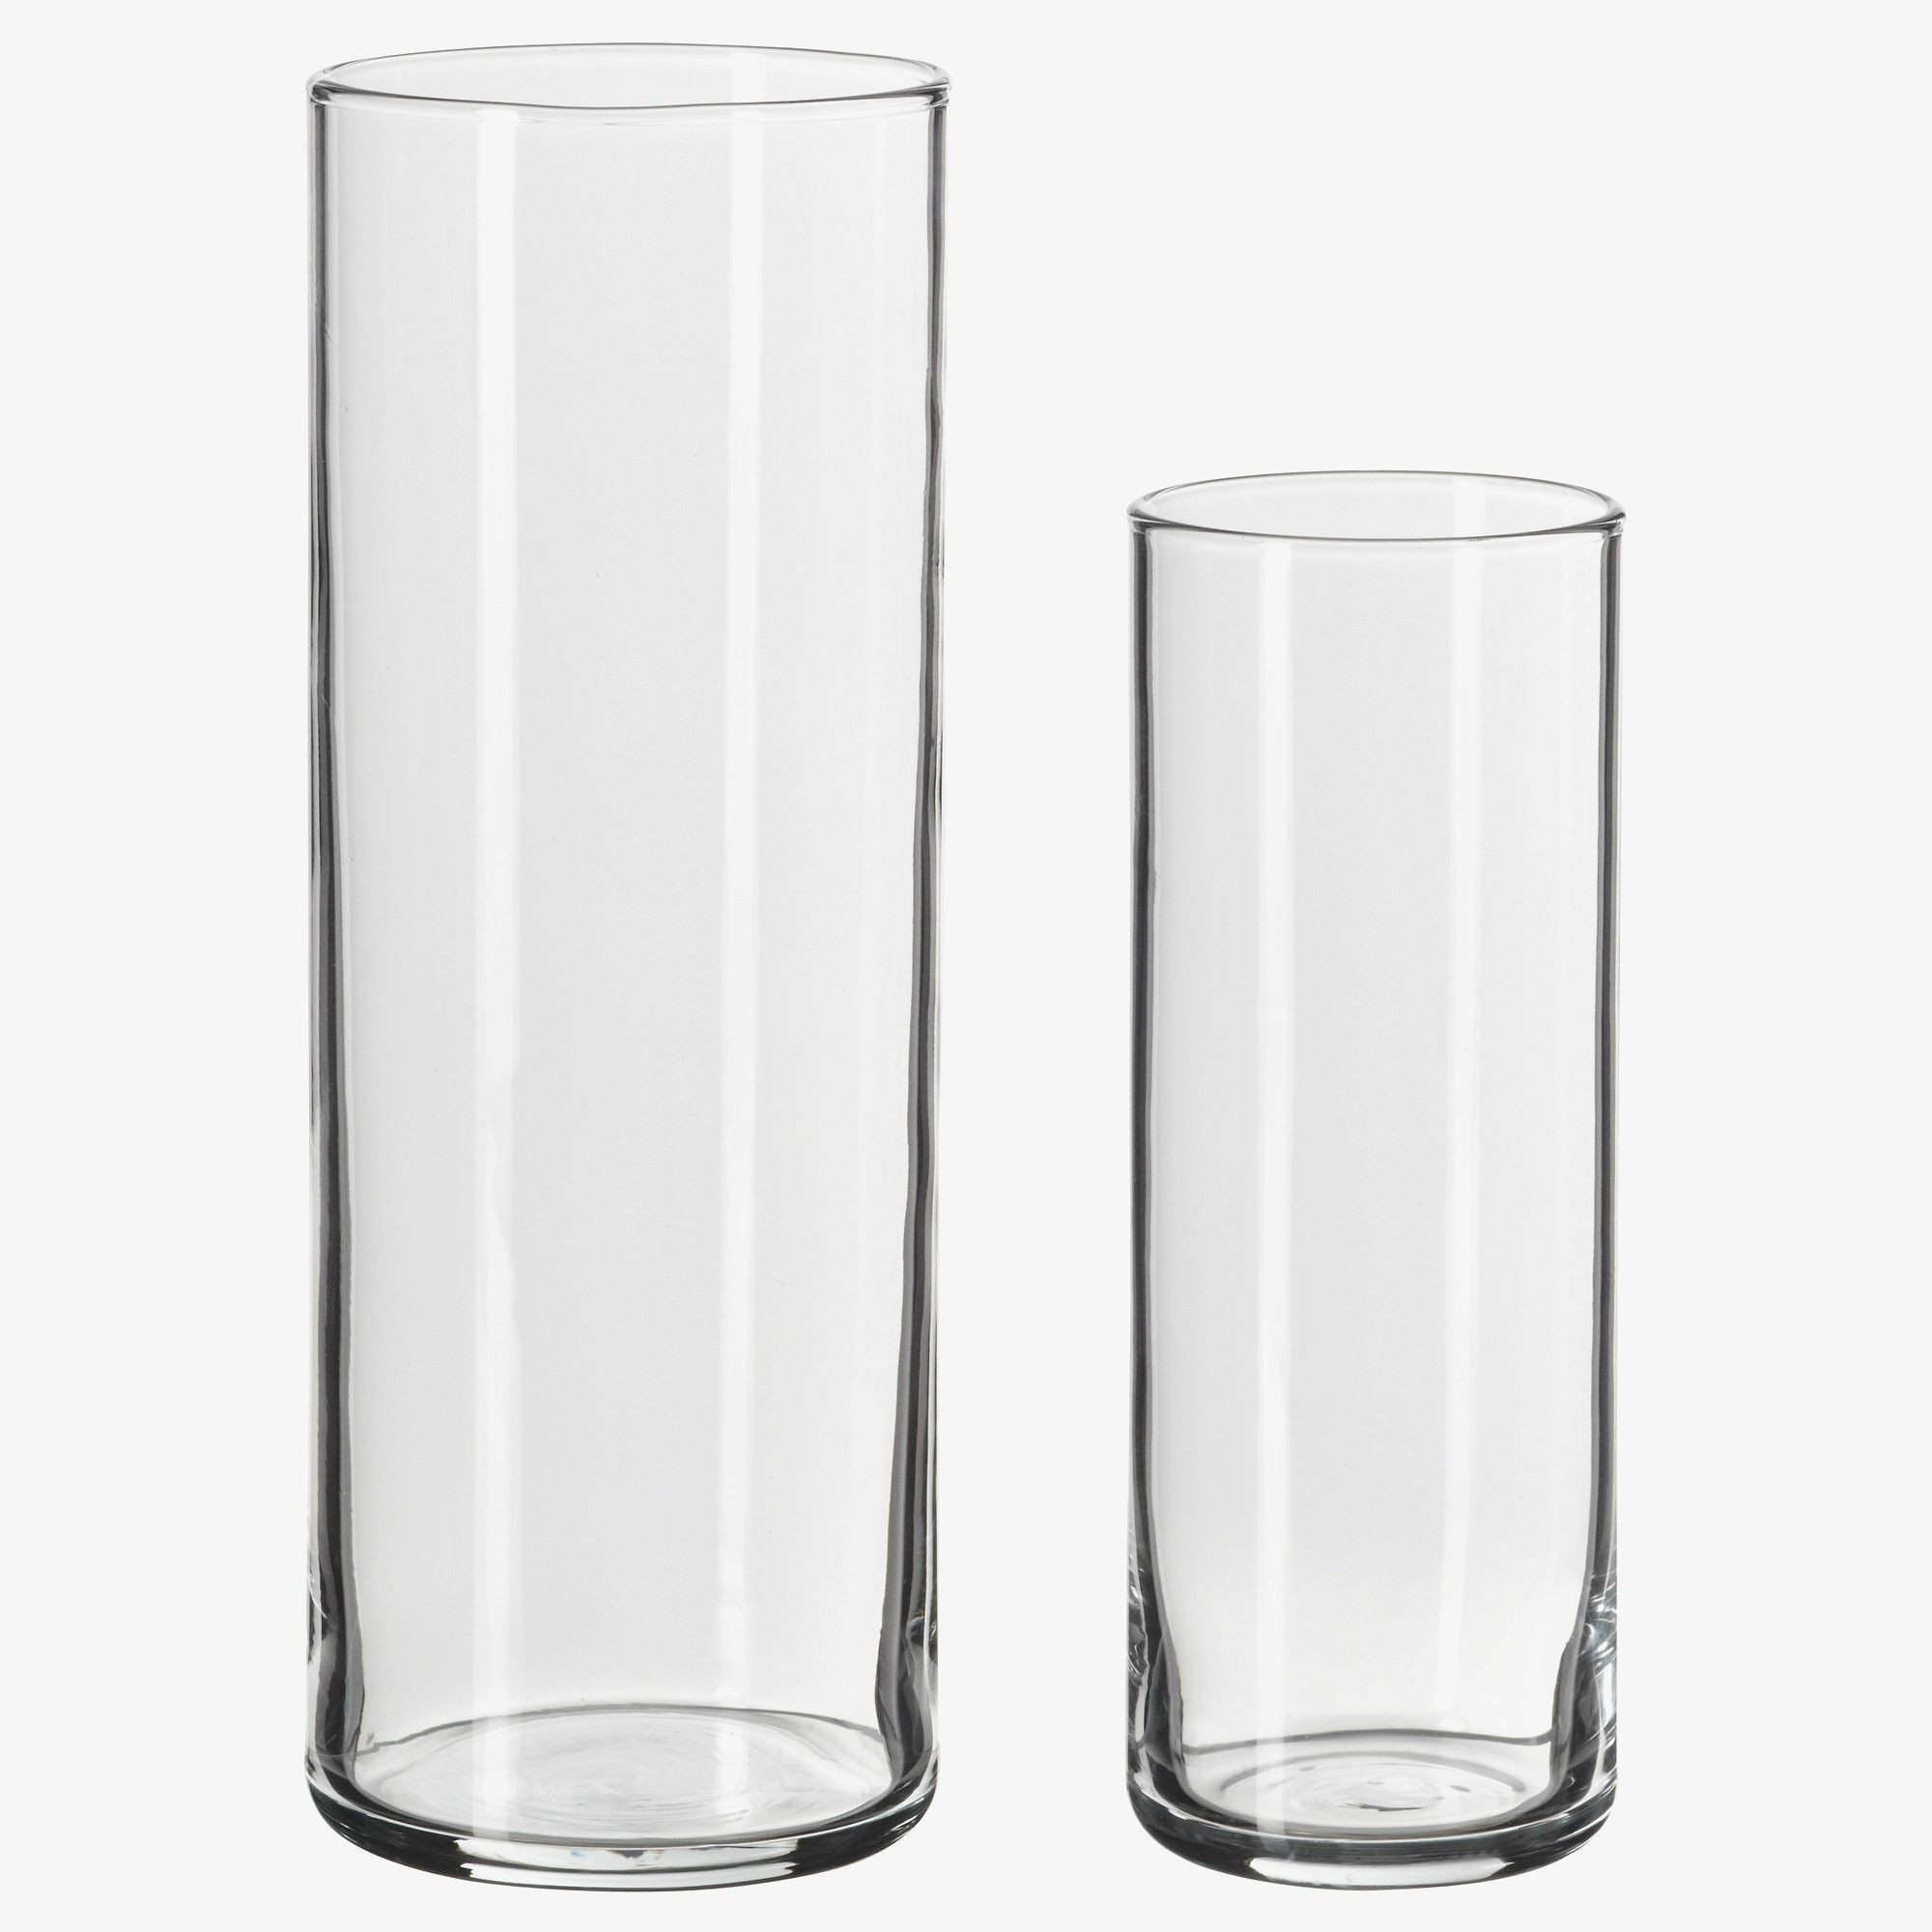 20 Spectacular 12 In Cylinder Vases Bulk 2024 free download 12 in cylinder vases bulk of 40 glass vases bulk the weekly world inside clear glass tv stand charming new design ikea mantel great pe s5h